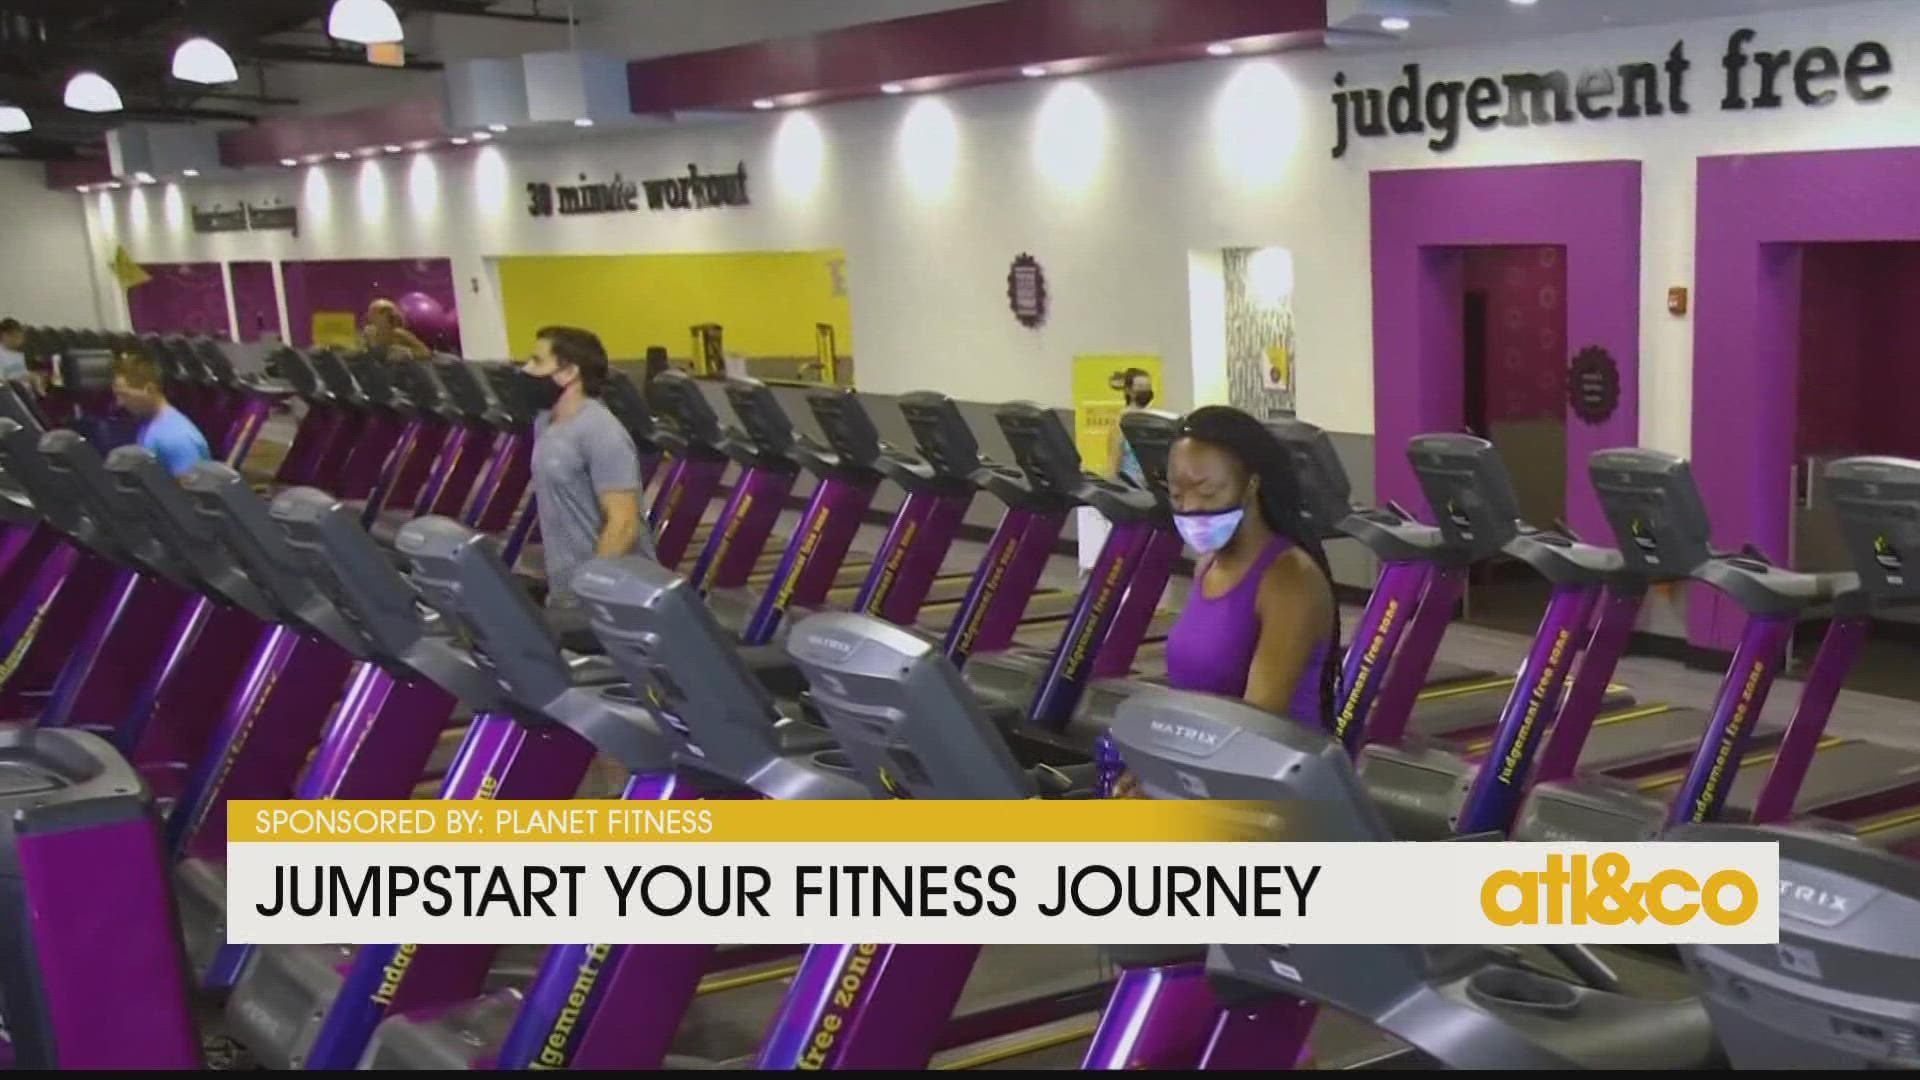 Feel "fitacular" in 2022! Planet Fitness is spacious, clean, and judgement-free for your New Year's goals.